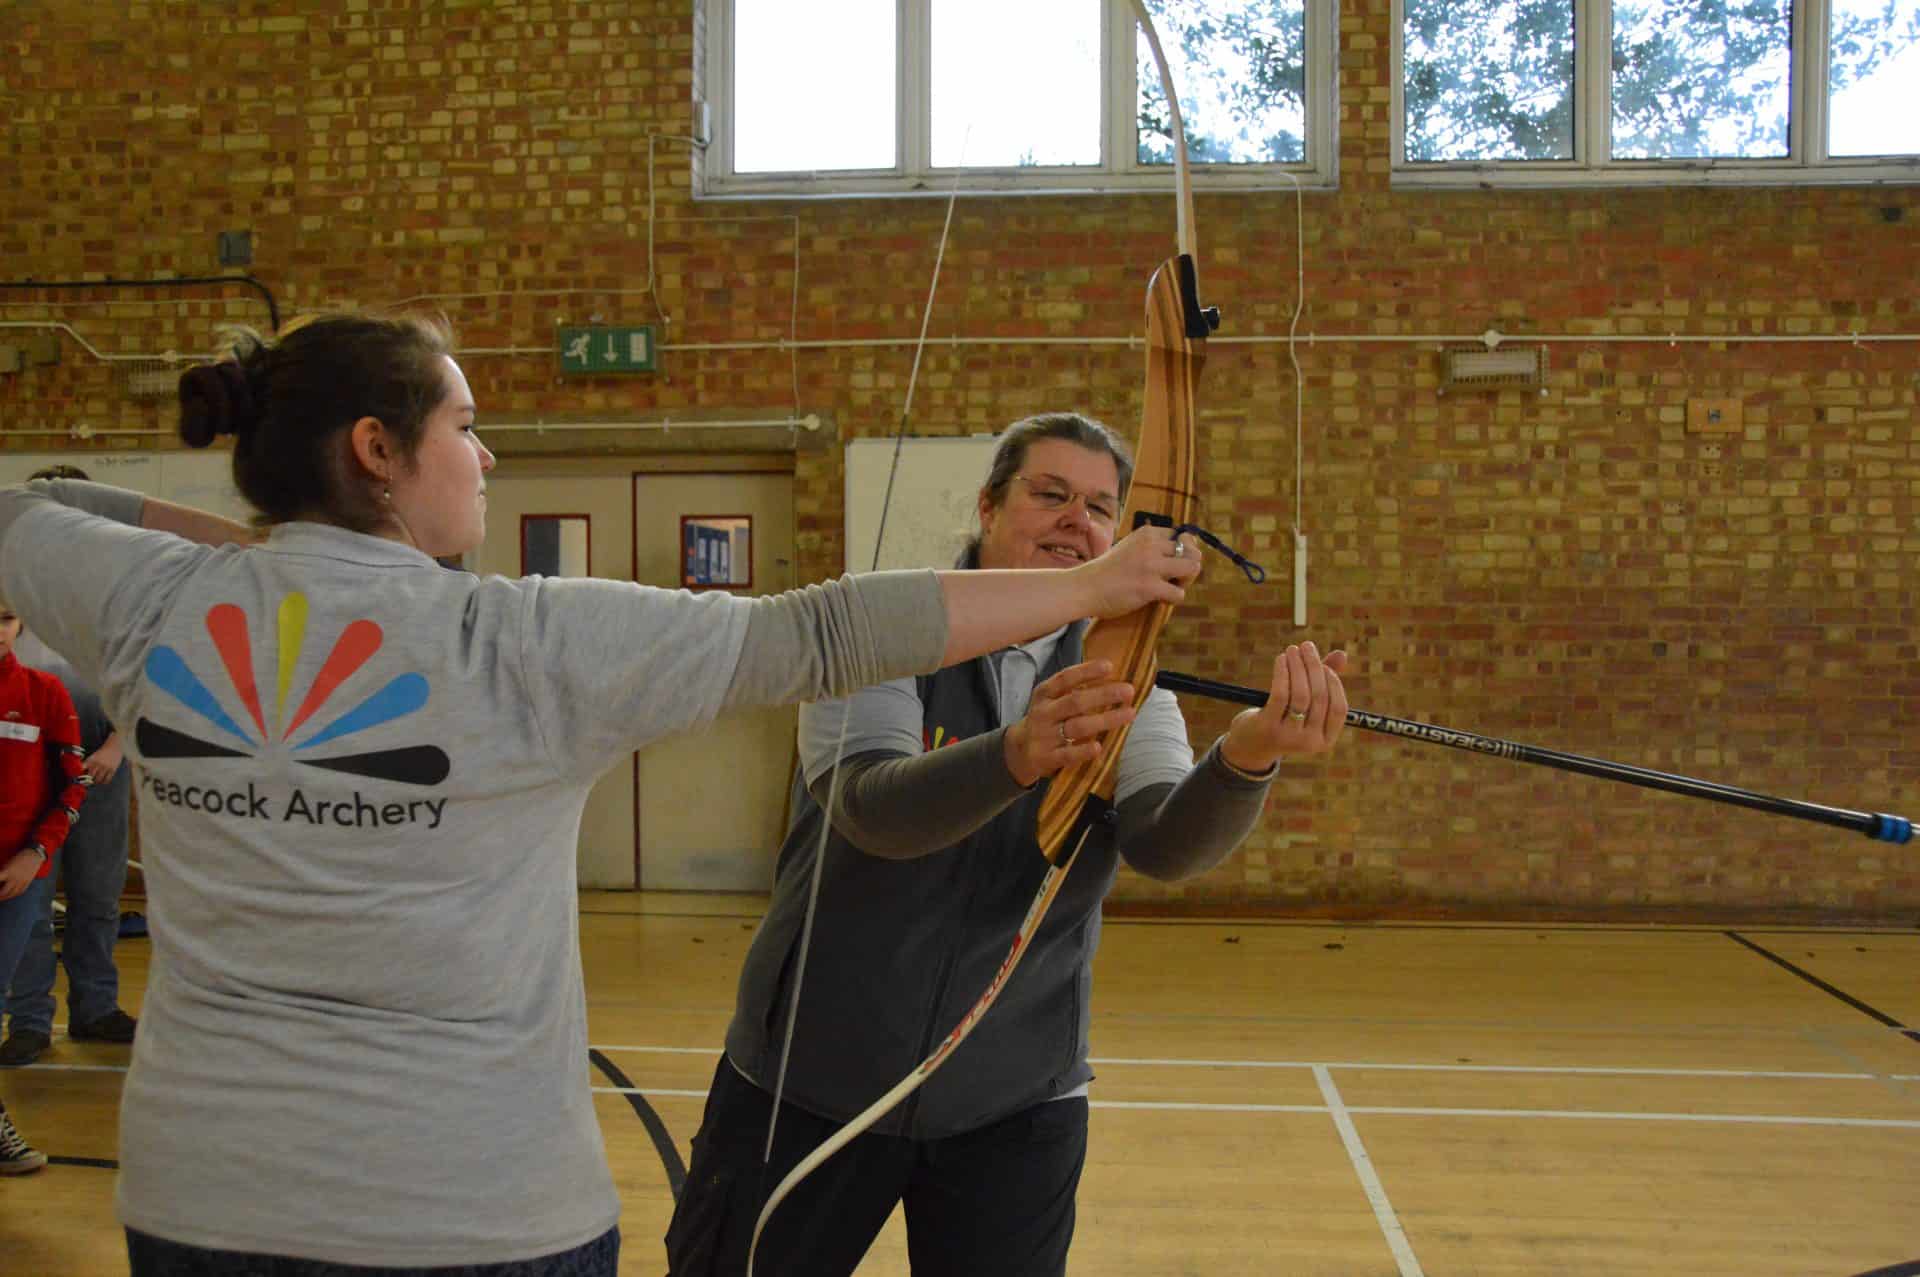 Become an archery coach and help others reach their potential